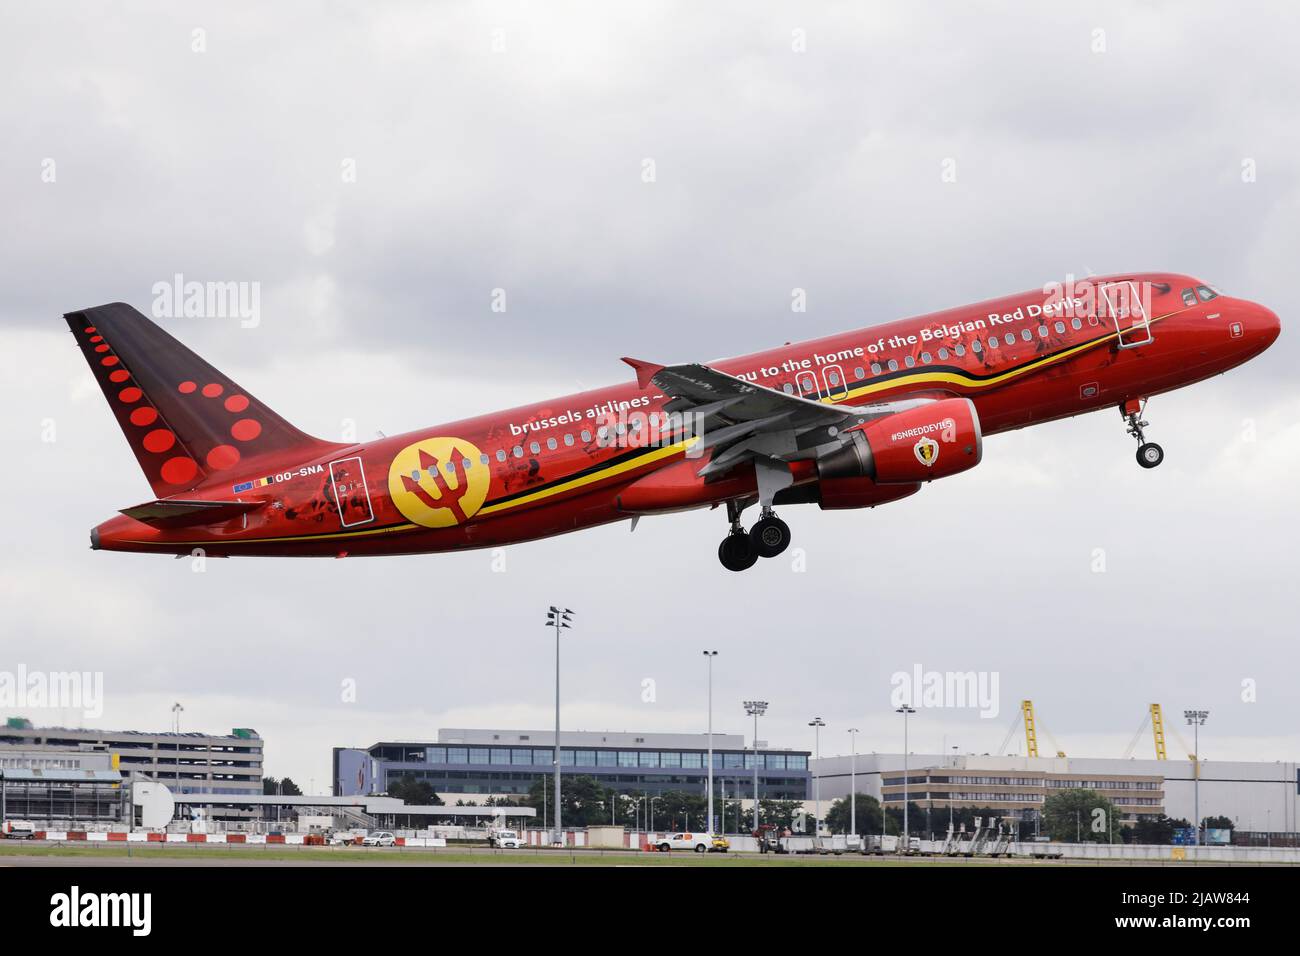 Illustration shows the special plane of Brussels Airlines called 'the Trident' with Belgian flag colours and pictures of players, at the take off at the departure of the Belgian national soccer team Red Devils, Wednesday 13 June 2018, in Zaventem airport. The Red Devils flight to Moscow today for the FIFA World Cup 2018. BELGA PHOTO THIERRY ROGE Stock Photo